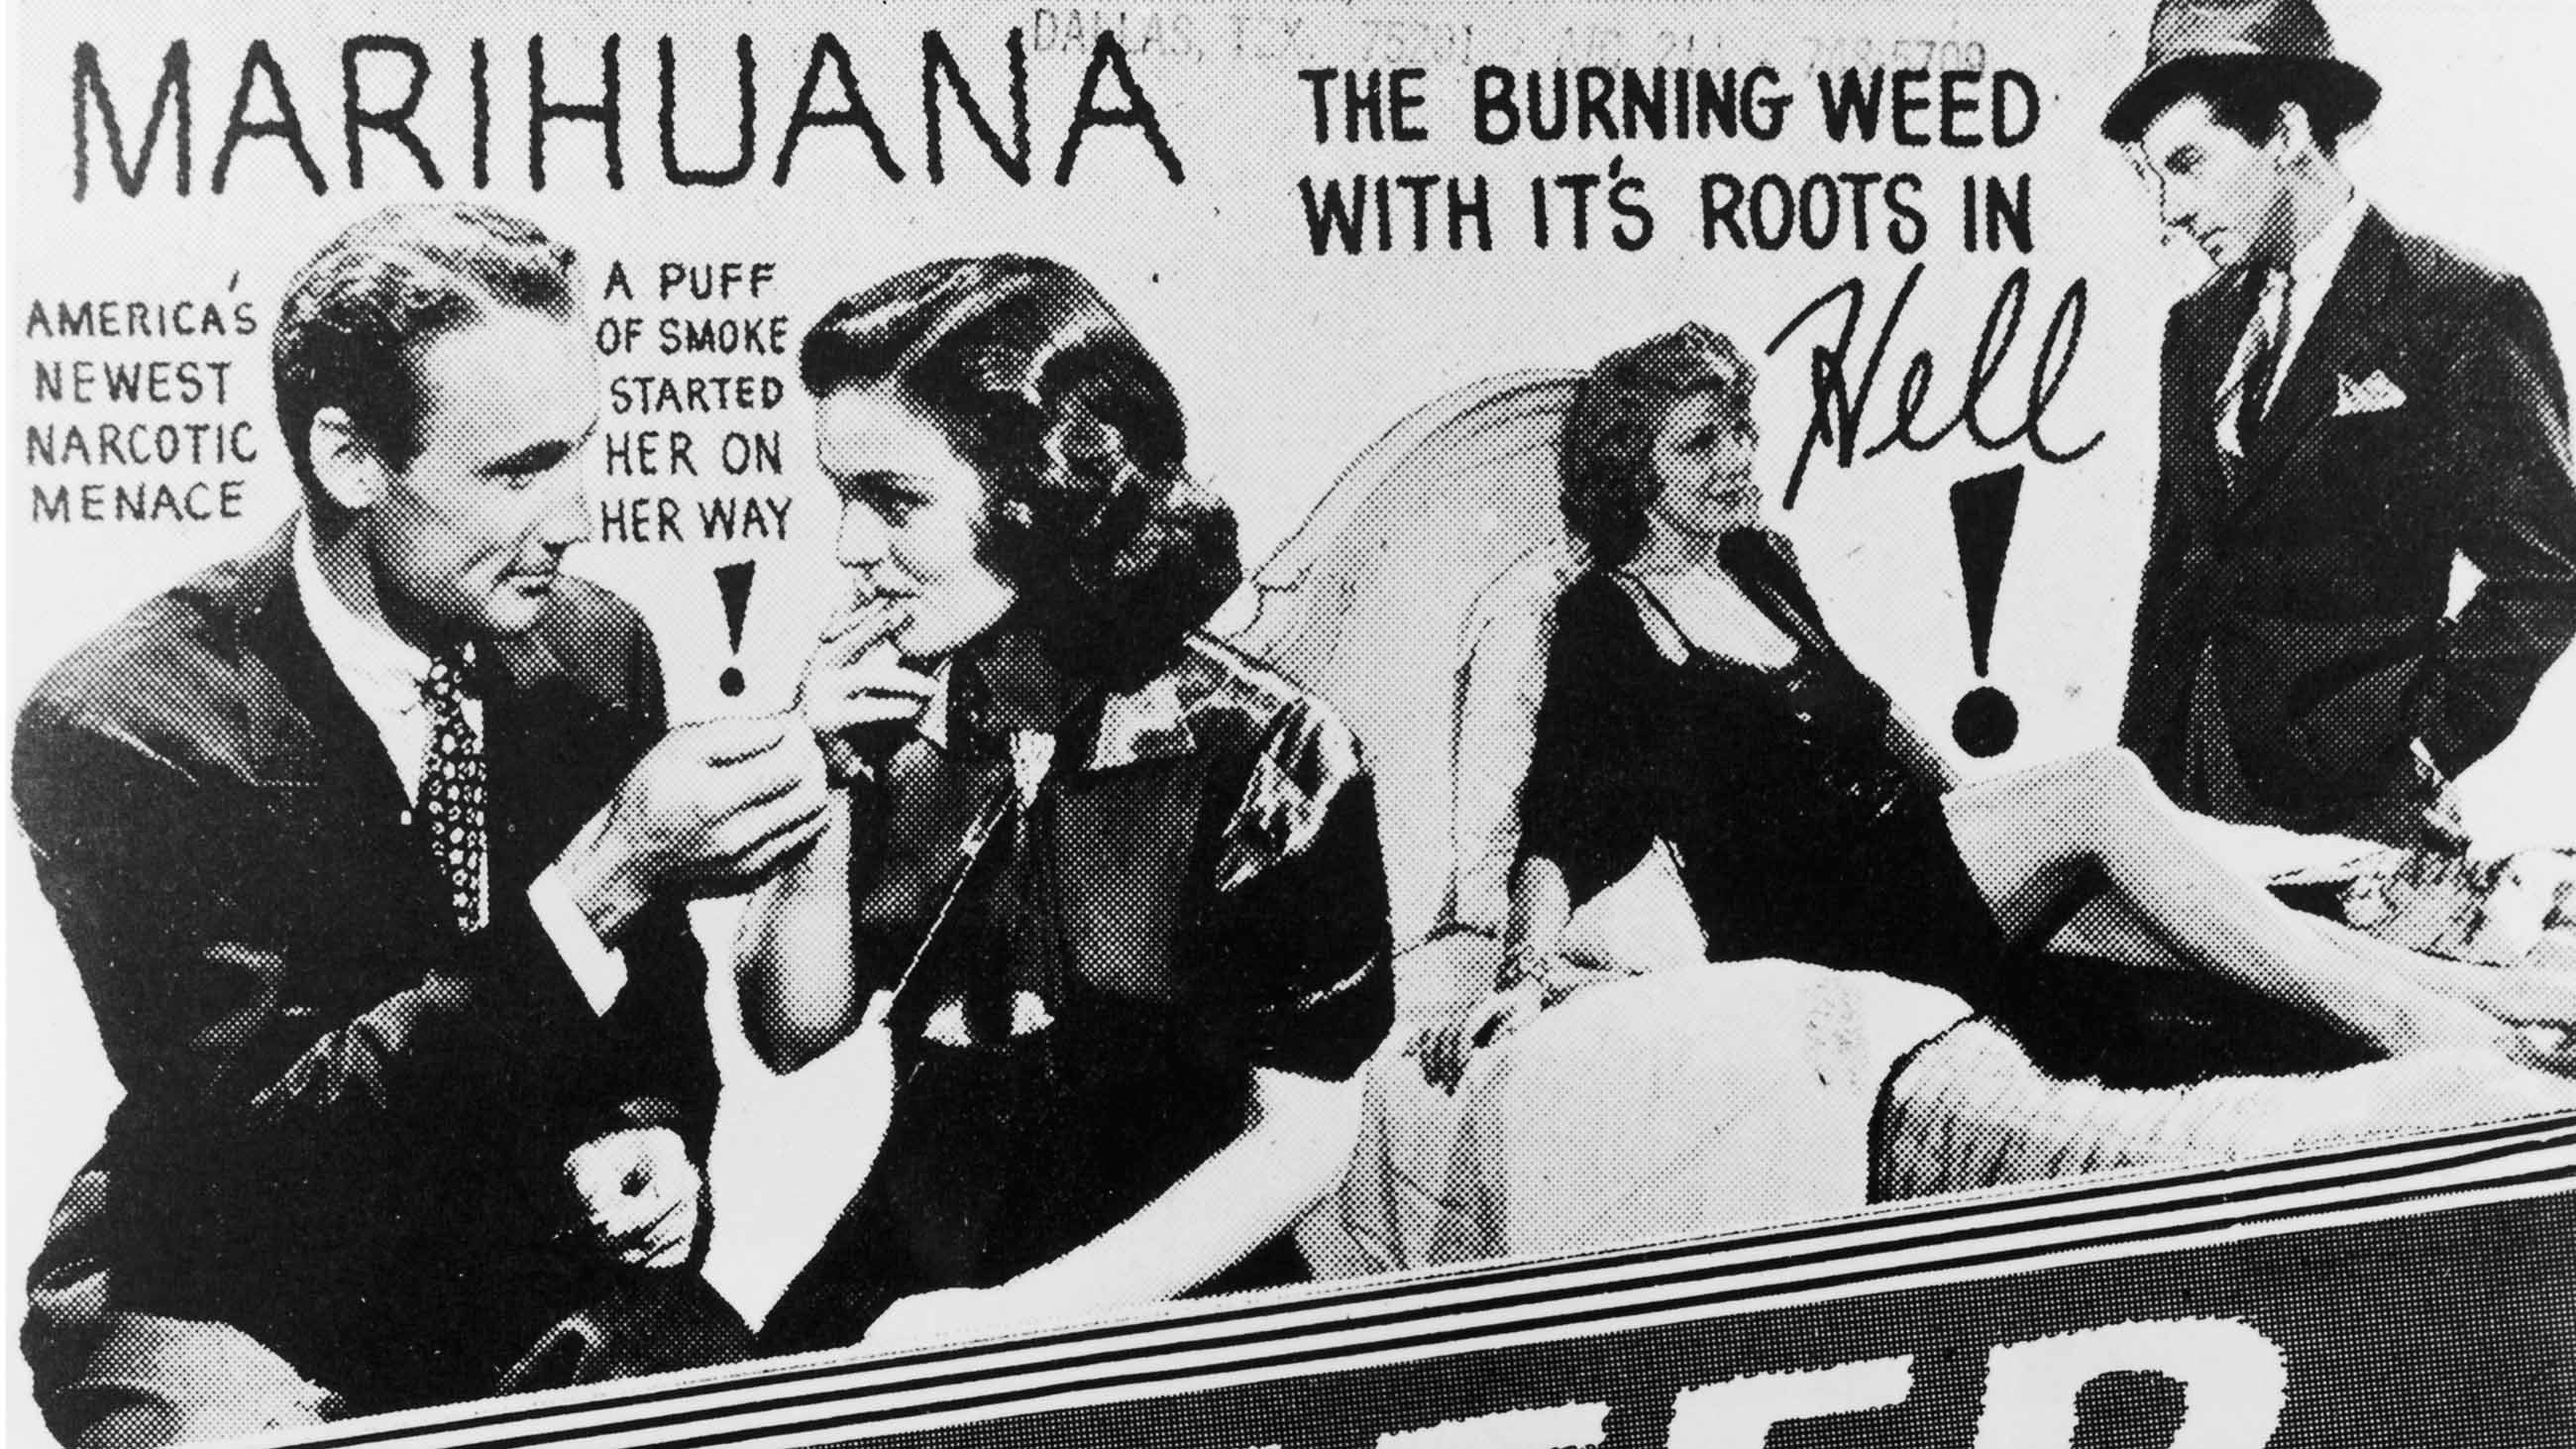 Propaganda in Media - reefer madness - To Marihuana The Burning Weed